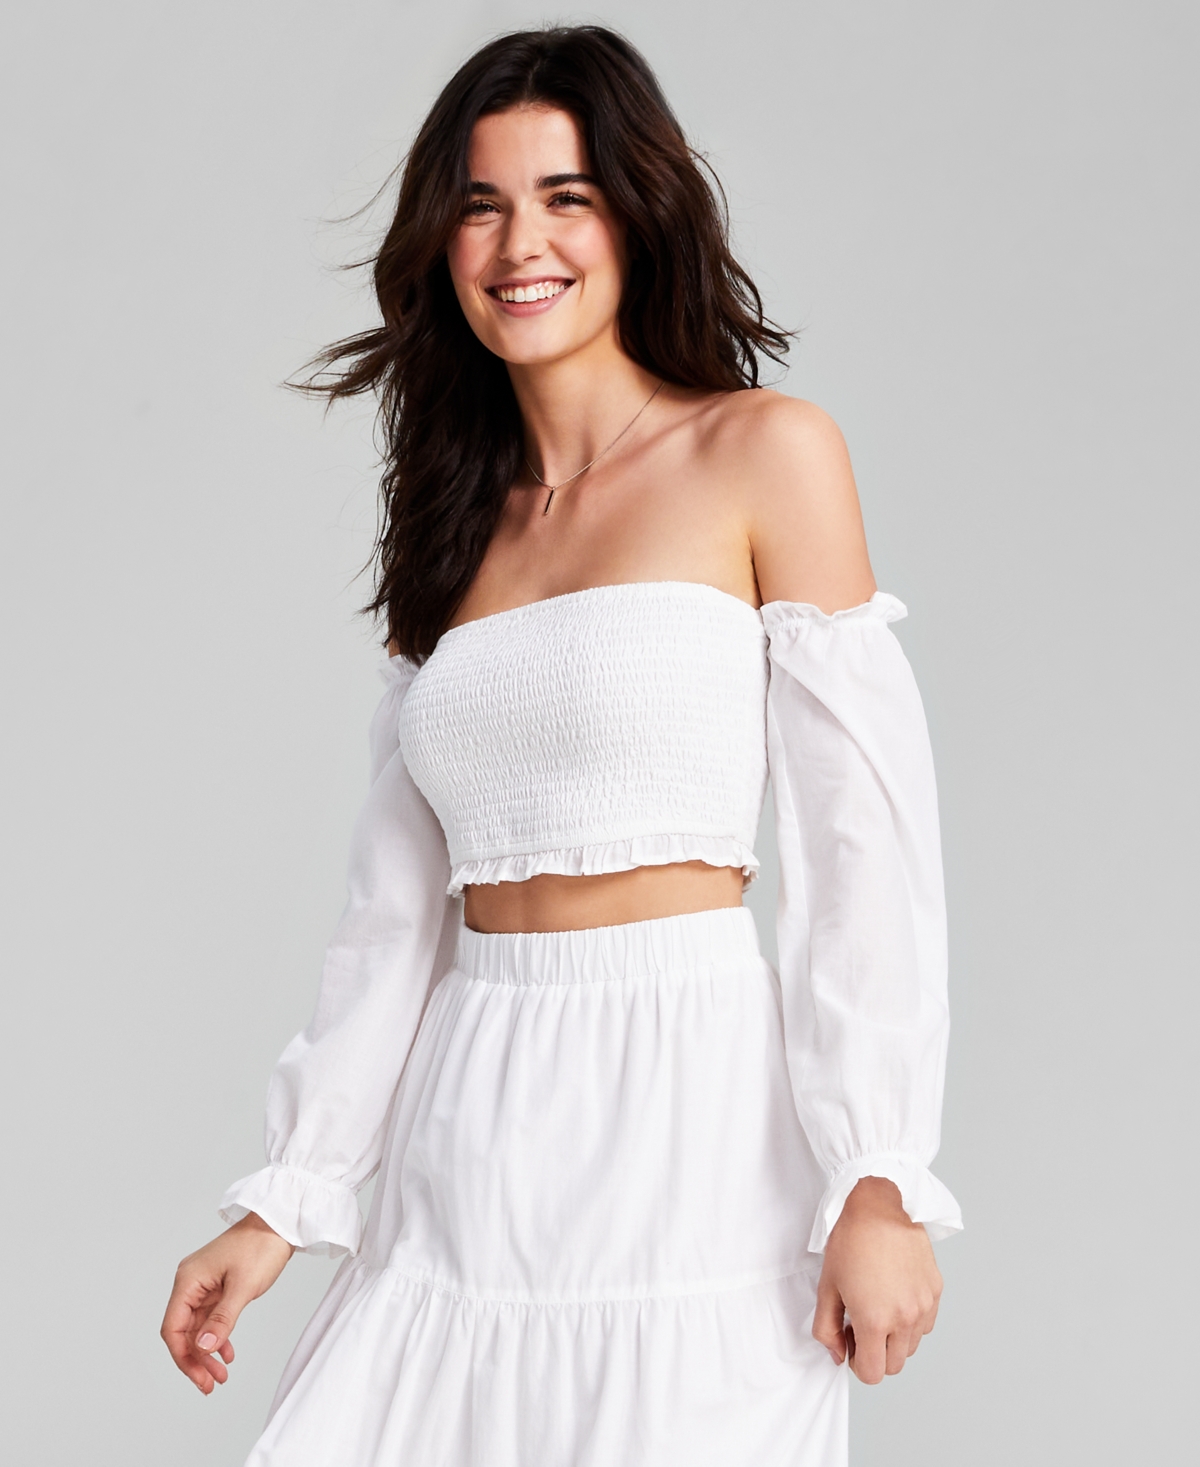 AND NOW THIS WOMEN'S COTTON OFF-THE-SHOULDER SMOCKED TOP